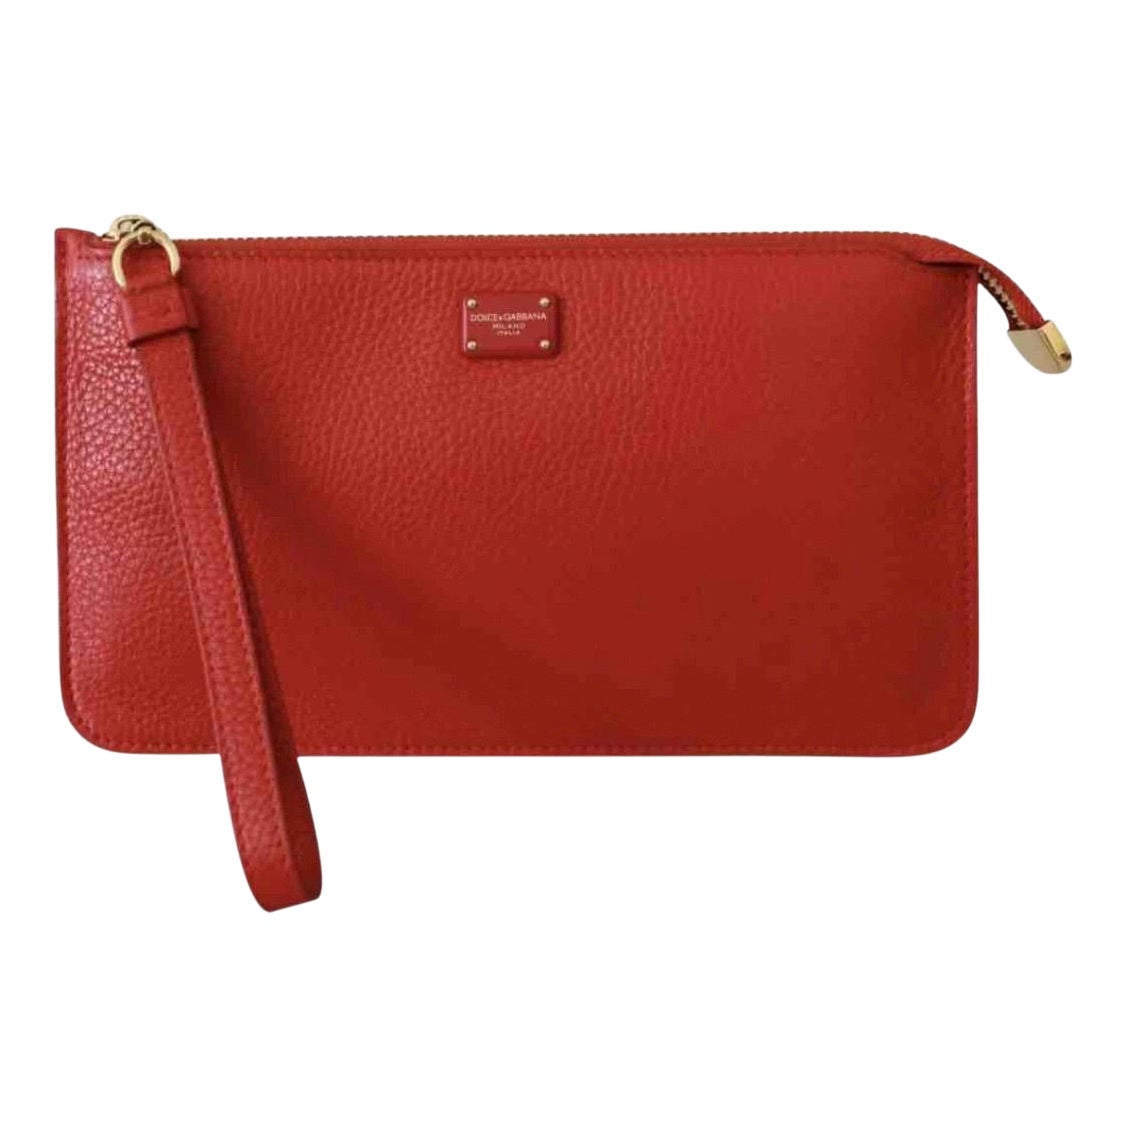 Dolce & Gabbana red leather Wrist Pouch Toiletry Organizer Wallet clutch bag For Sale